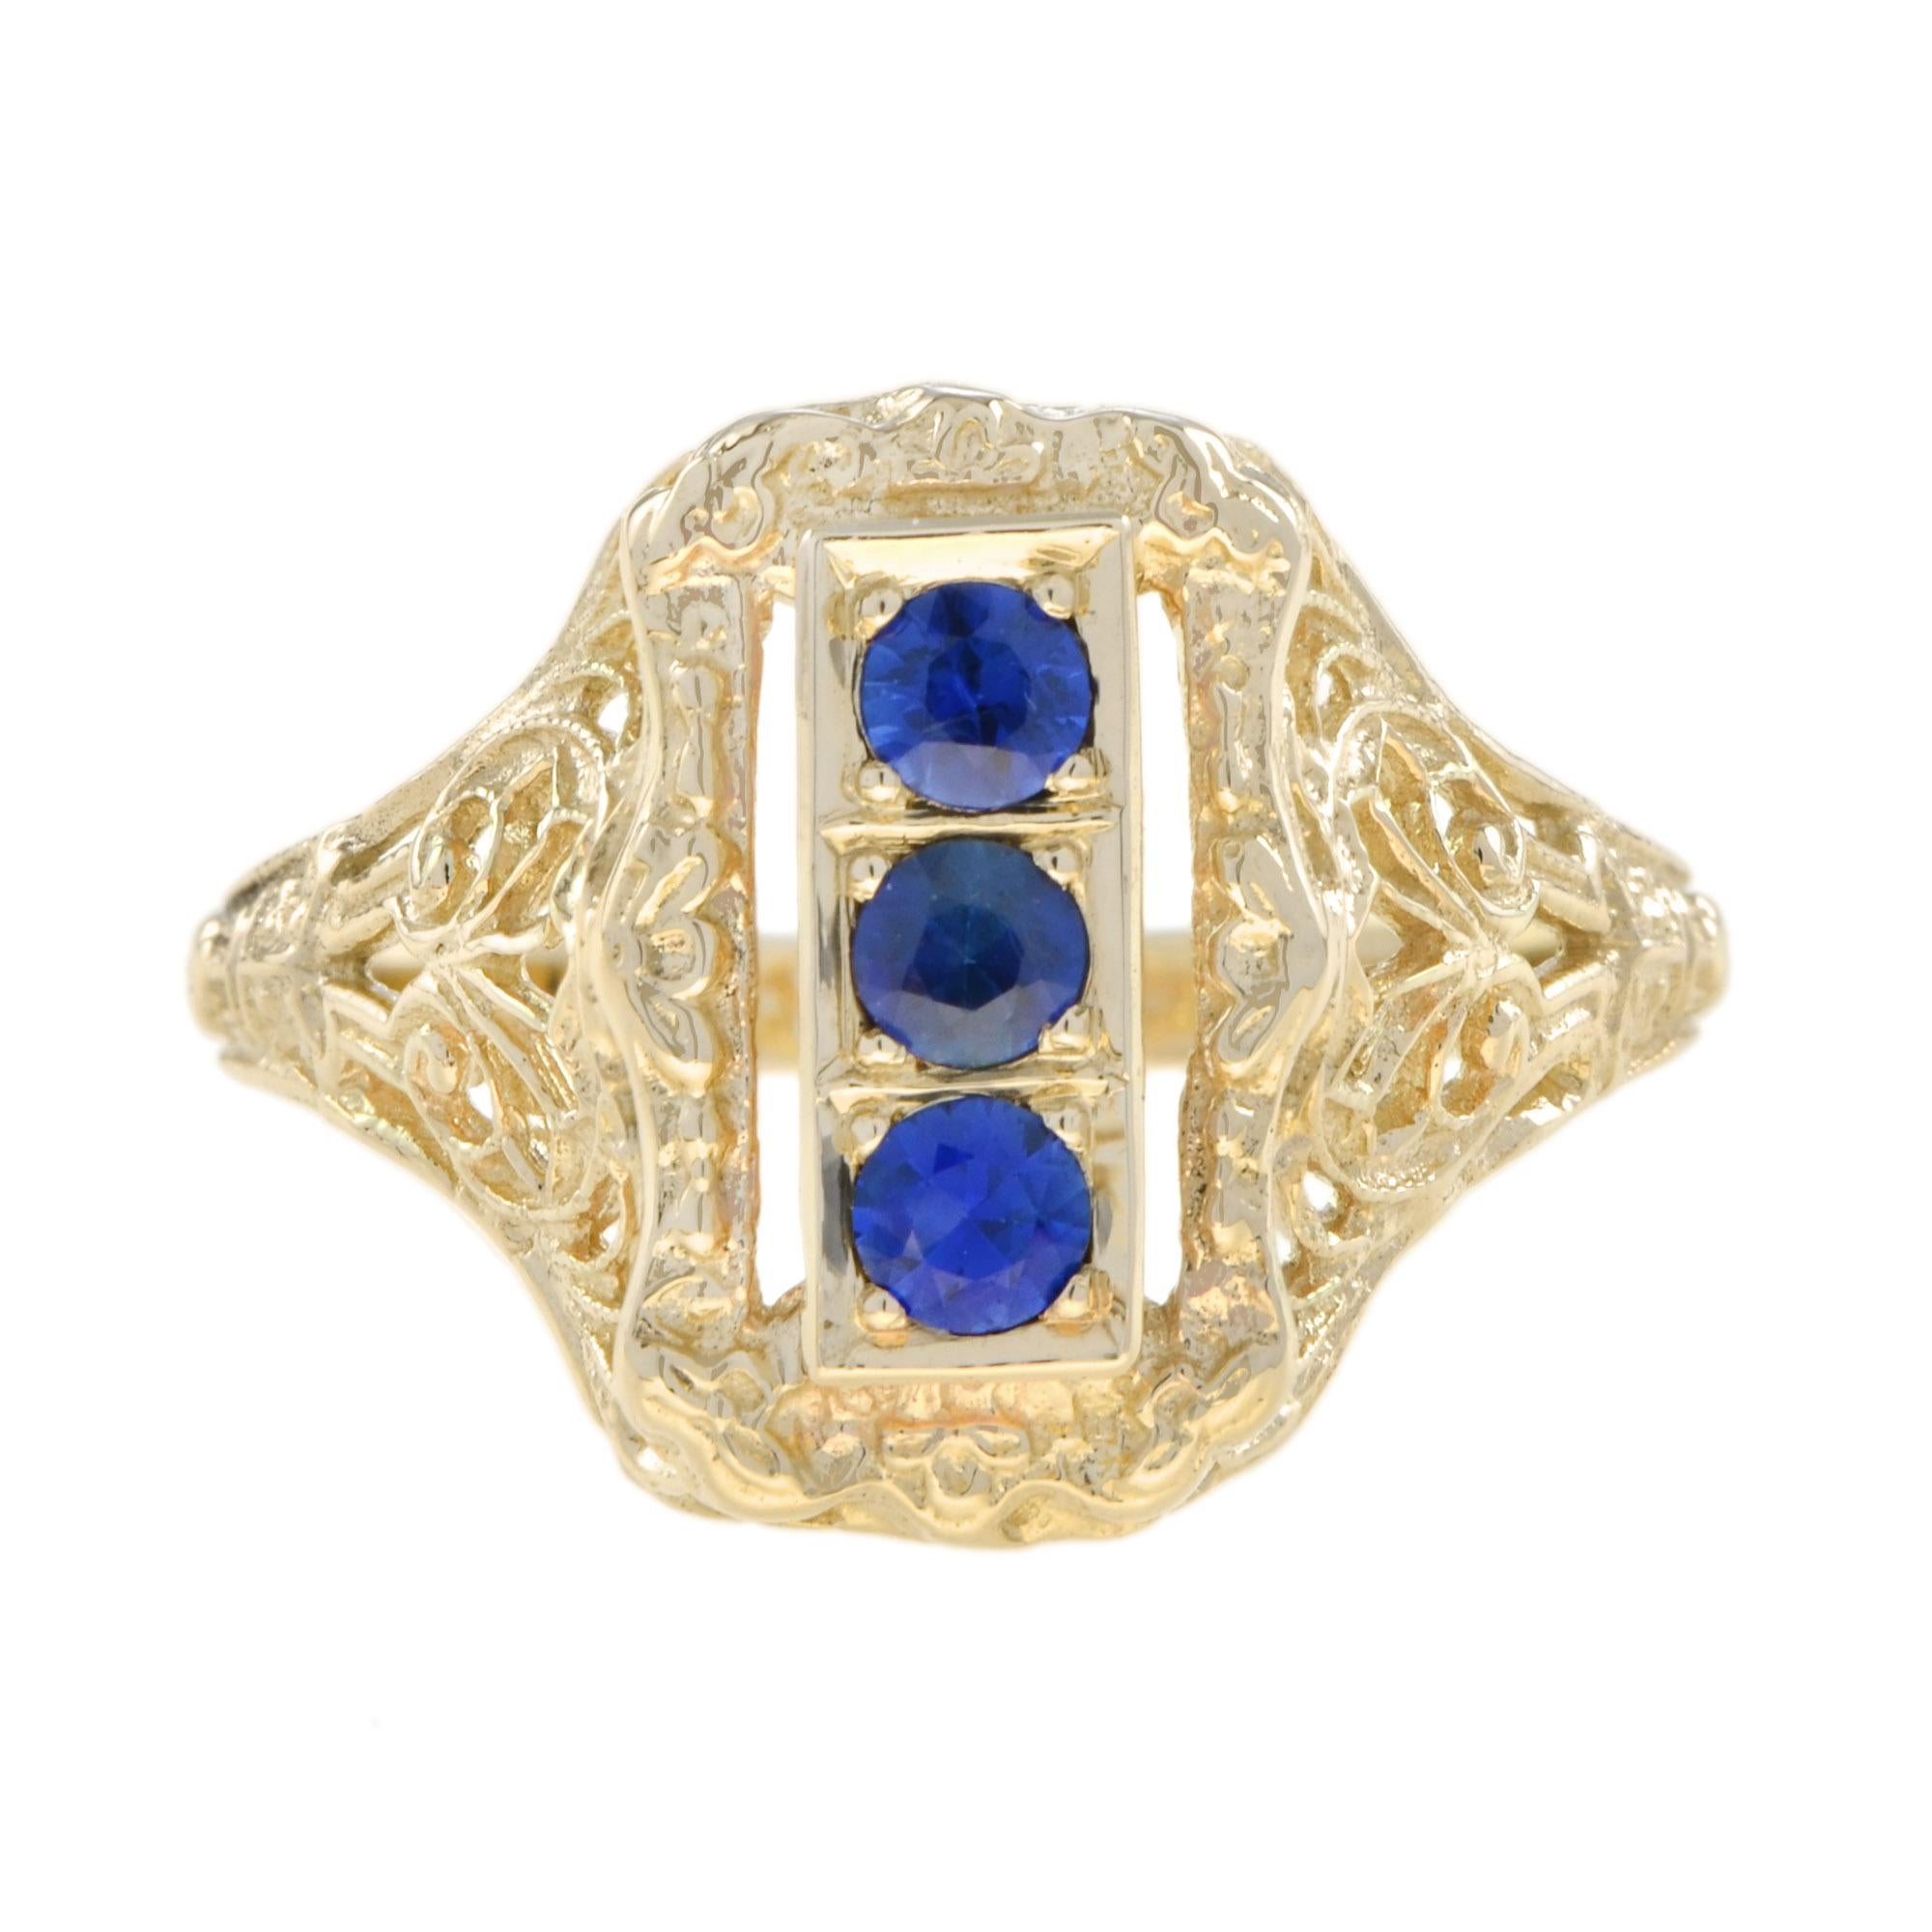 An Art Deco style filigree three stone ring with 2.7 mm. natural blue sapphires in the center. Filigree rings are timeless in style and can be enjoyed, cherished and handed down as precious family heirlooms.

Ring Information
Metal: 14K Yellow Gold